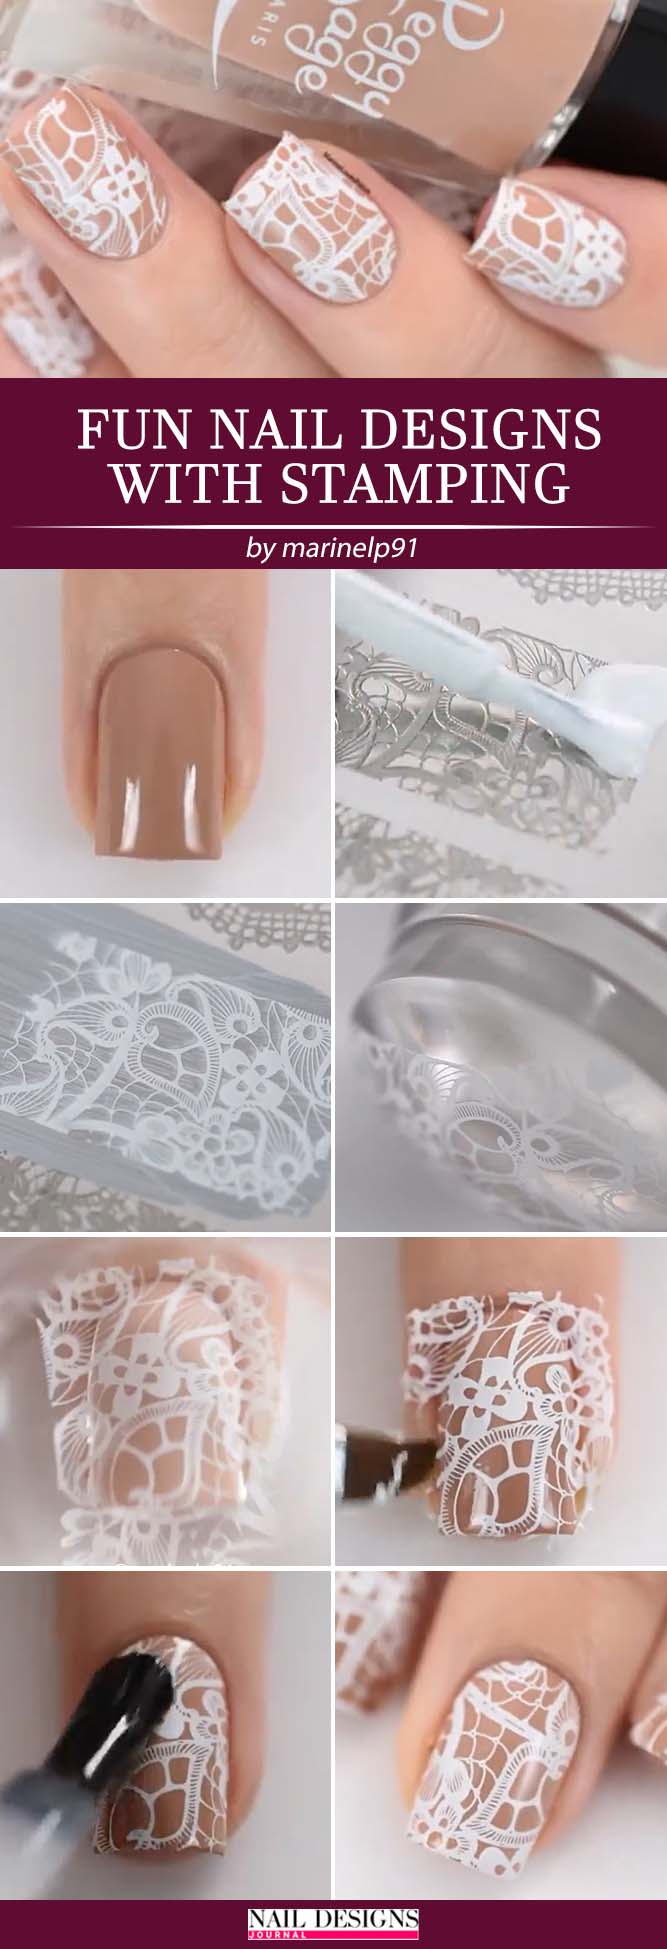 Nude and White Nail Designs with Stamping